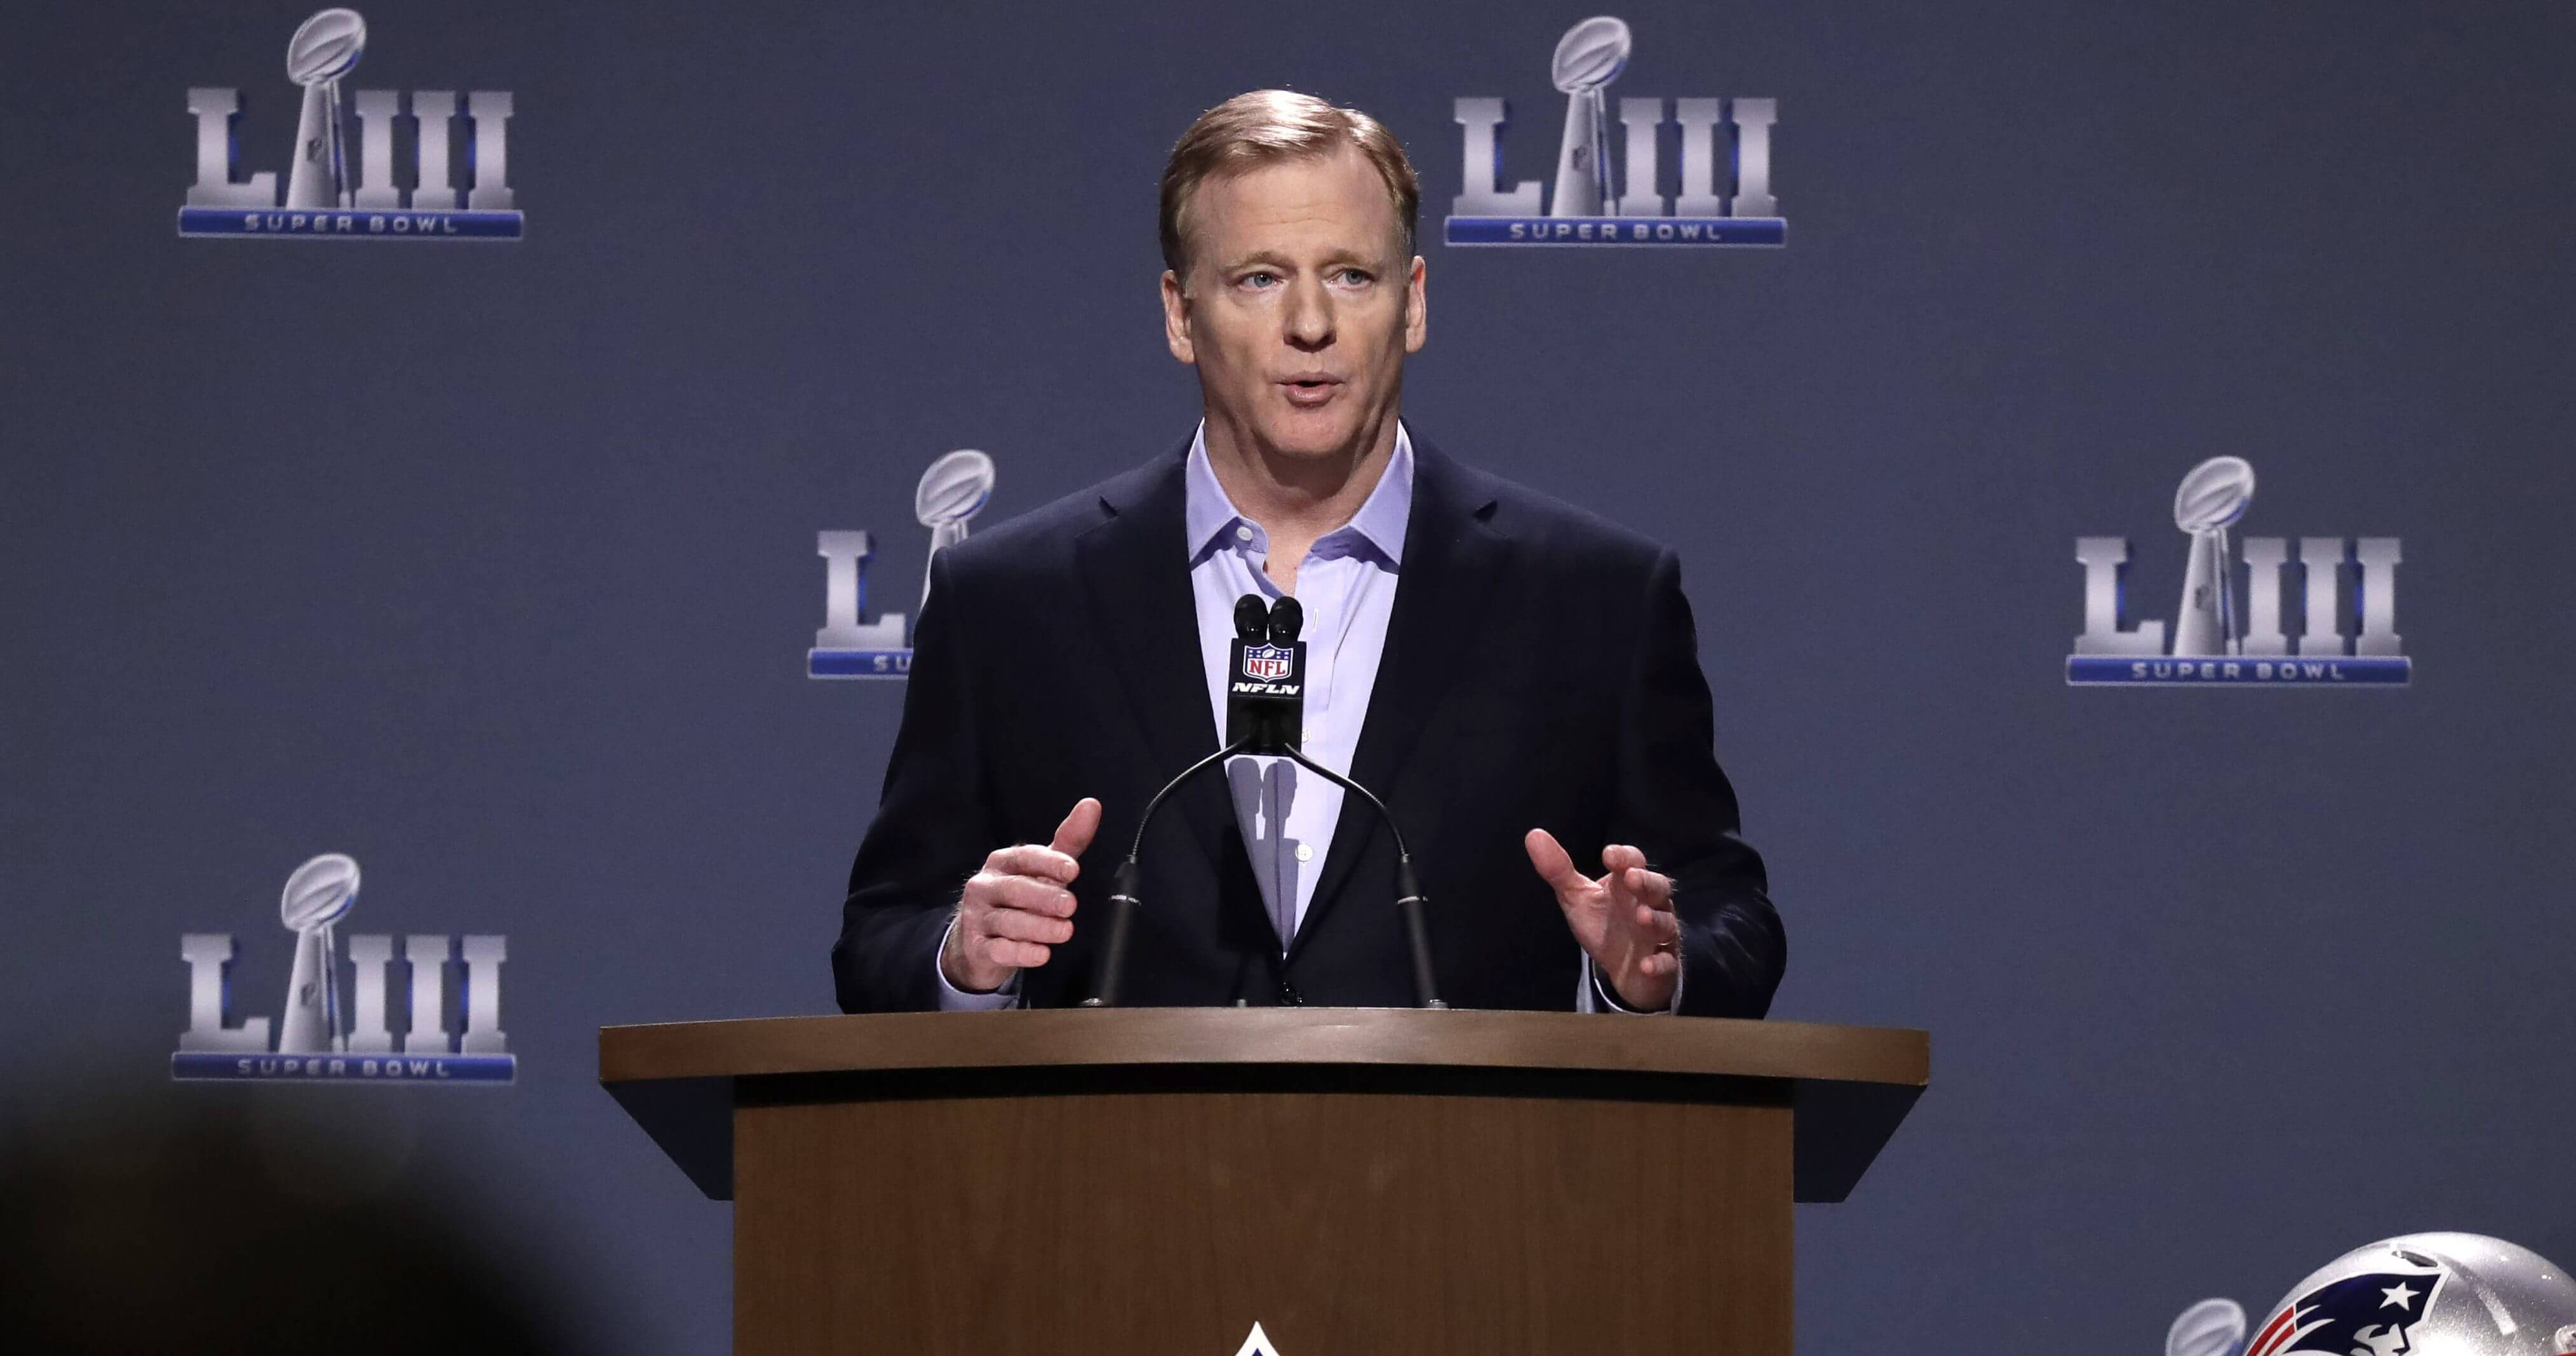 NFL Commissioner Roger Goodell answers a question Wednesday during a news conference for Super Bowl LIII in Atlanta.